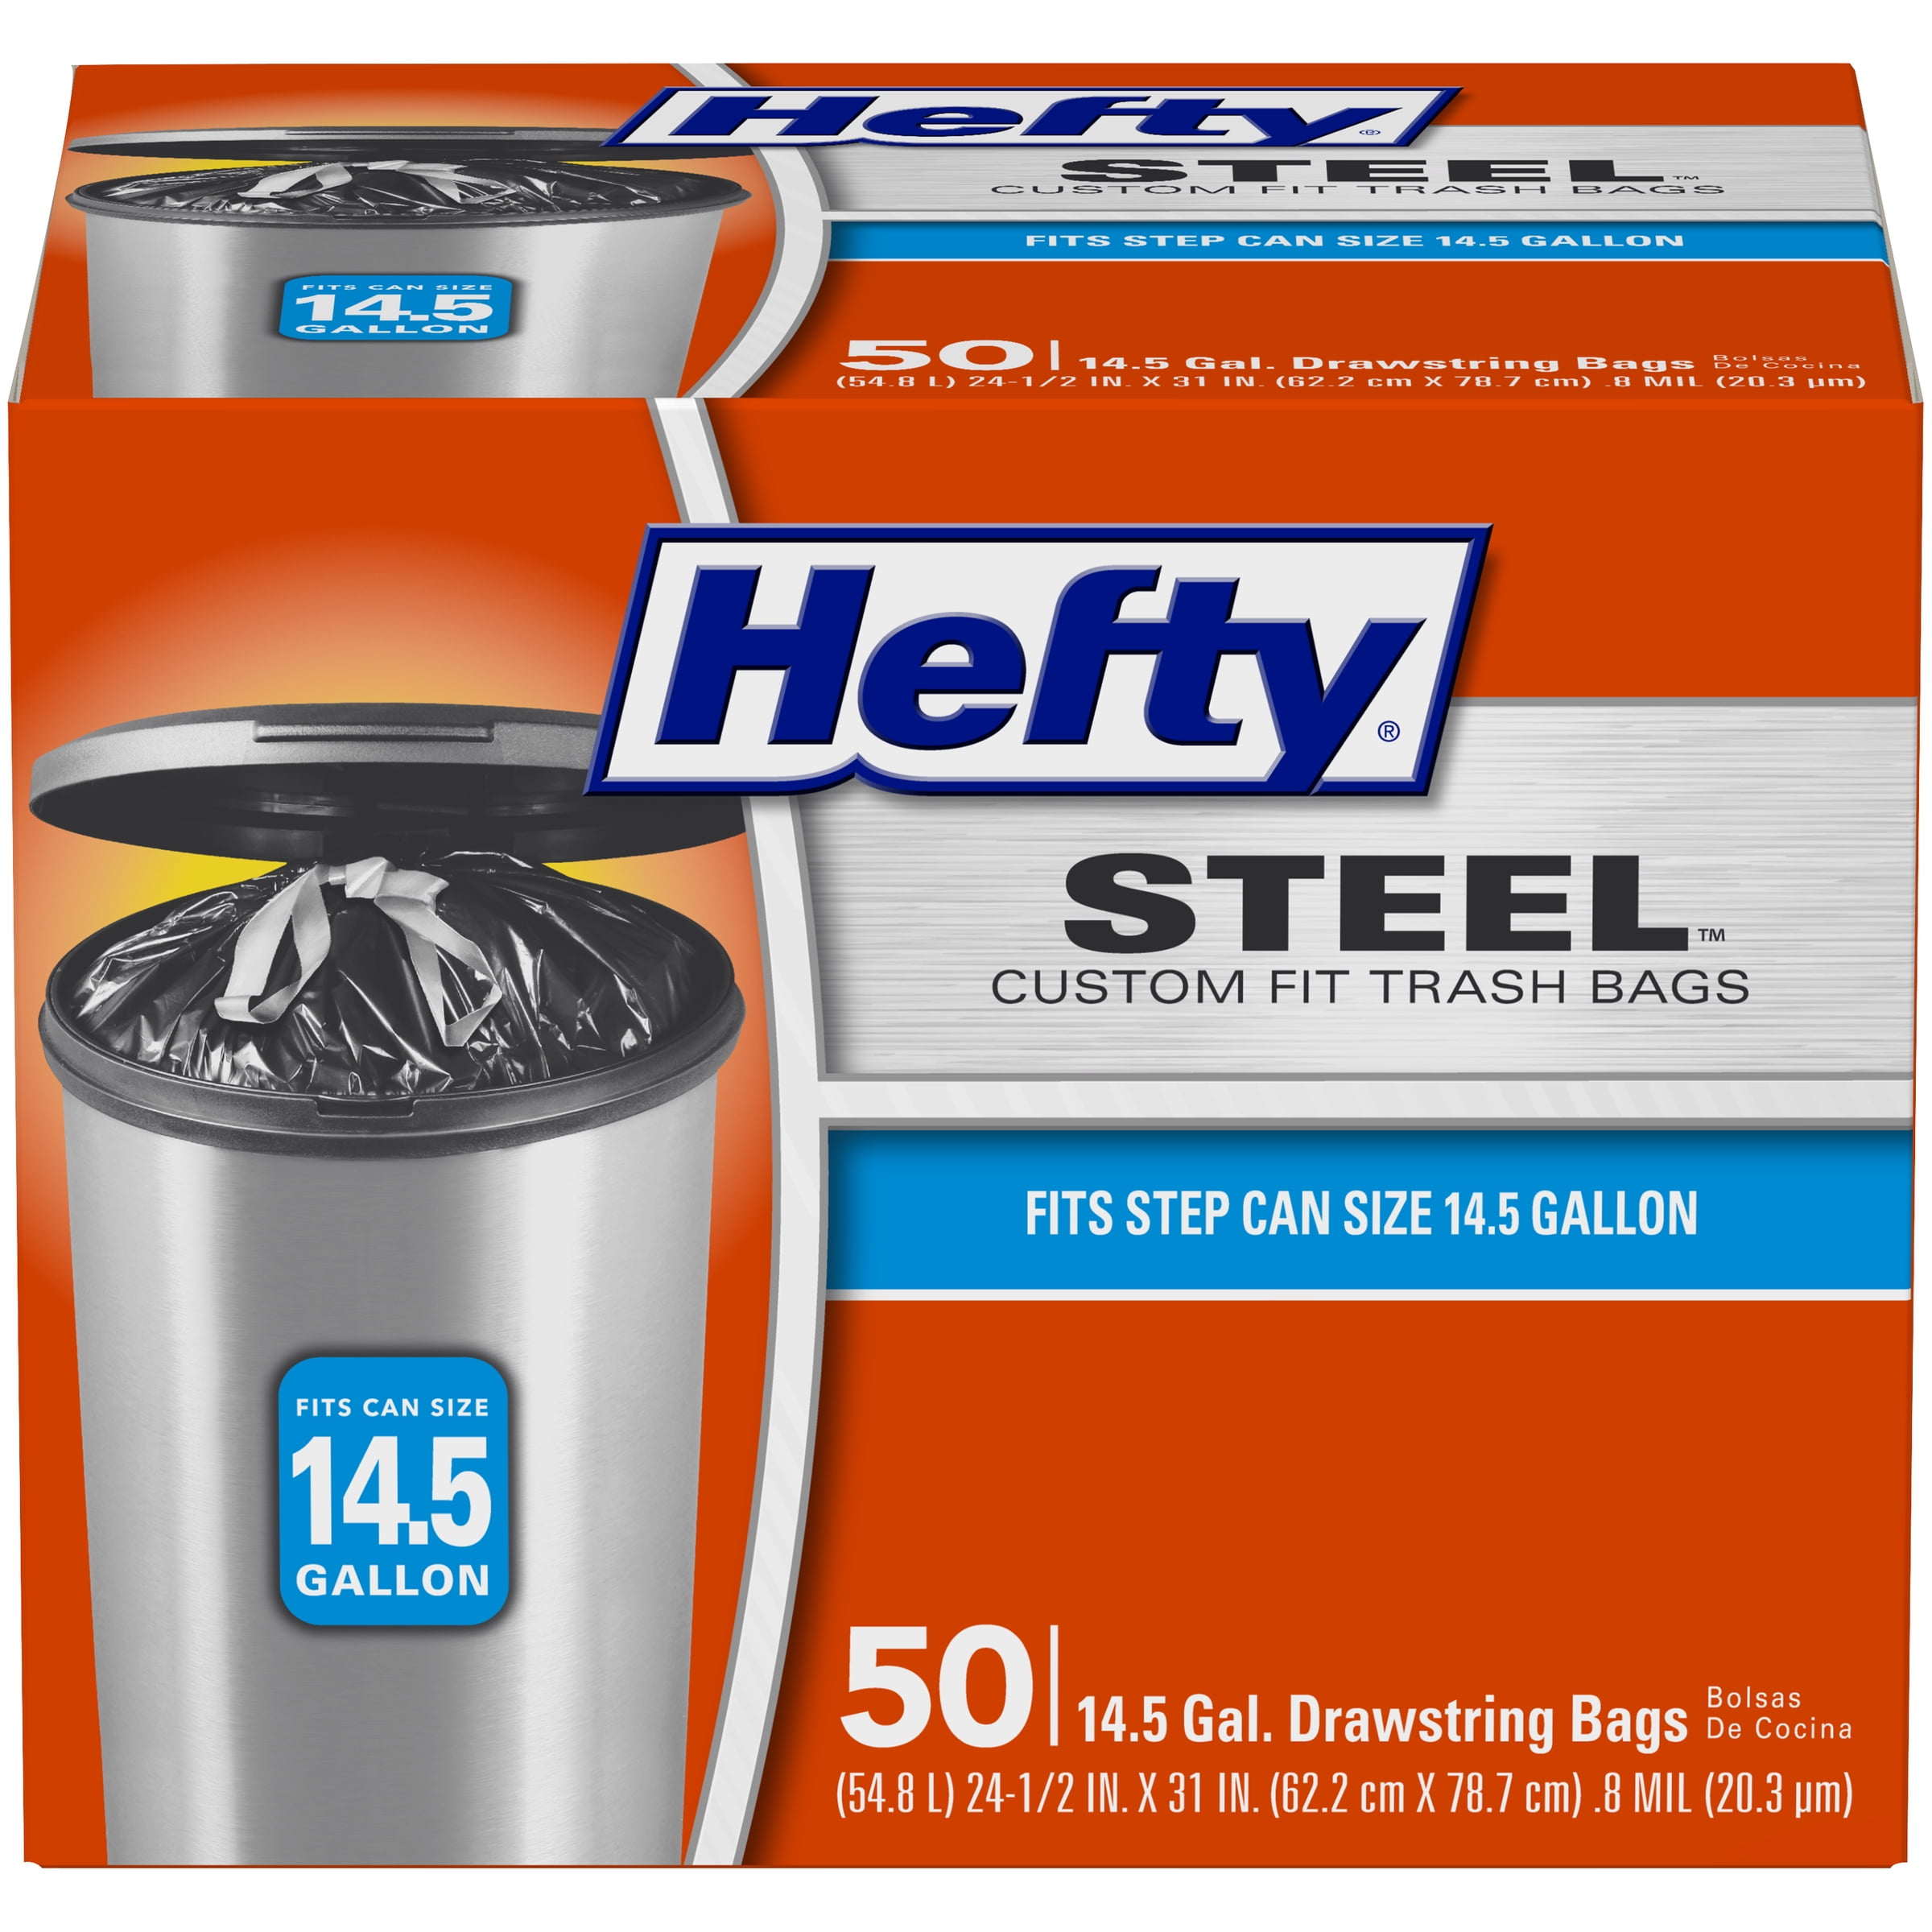 Hefty Steel Custom Fit L Size Drawstring Trash Bags, Black, Unscented, 14.5 Gallon, 50 Count